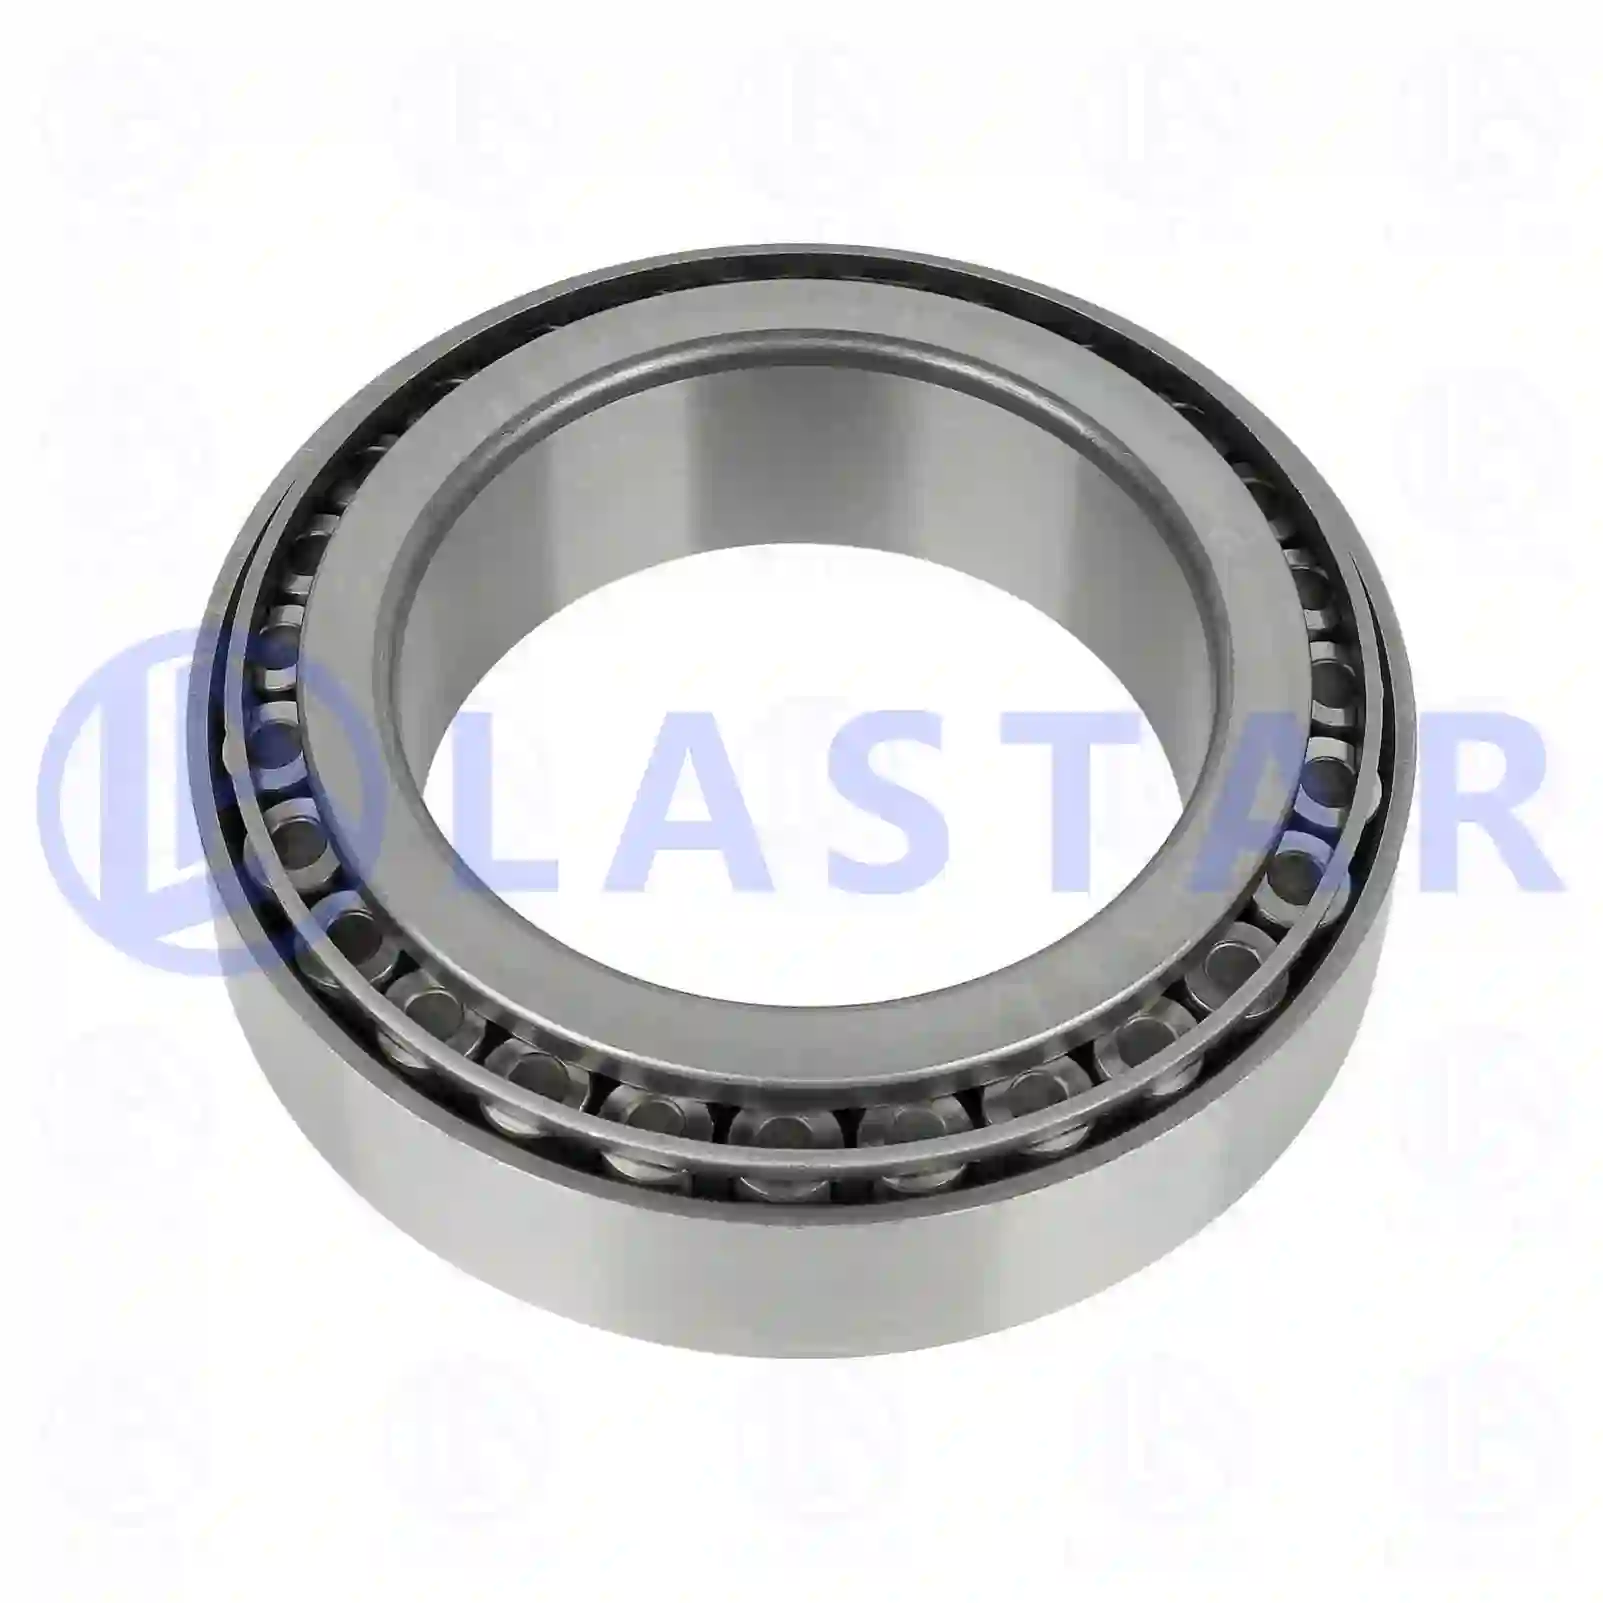 Tapered roller bearing, 77724898, 0528430, 0676987, 528430, 676987, 005092802, 01104923, 01104923, 1104923, 06324990036, 06324990123, 81934200185, 81934200036, 87524601503, N1011053455, 0009809602, 0029818405, 0029819005, 0039818605, 0209814805, 3869817705, 0023432871, 676987, WHT006376, ZG03023-0008 ||  77724898 Lastar Spare Part | Truck Spare Parts, Auotomotive Spare Parts Tapered roller bearing, 77724898, 0528430, 0676987, 528430, 676987, 005092802, 01104923, 01104923, 1104923, 06324990036, 06324990123, 81934200185, 81934200036, 87524601503, N1011053455, 0009809602, 0029818405, 0029819005, 0039818605, 0209814805, 3869817705, 0023432871, 676987, WHT006376, ZG03023-0008 ||  77724898 Lastar Spare Part | Truck Spare Parts, Auotomotive Spare Parts